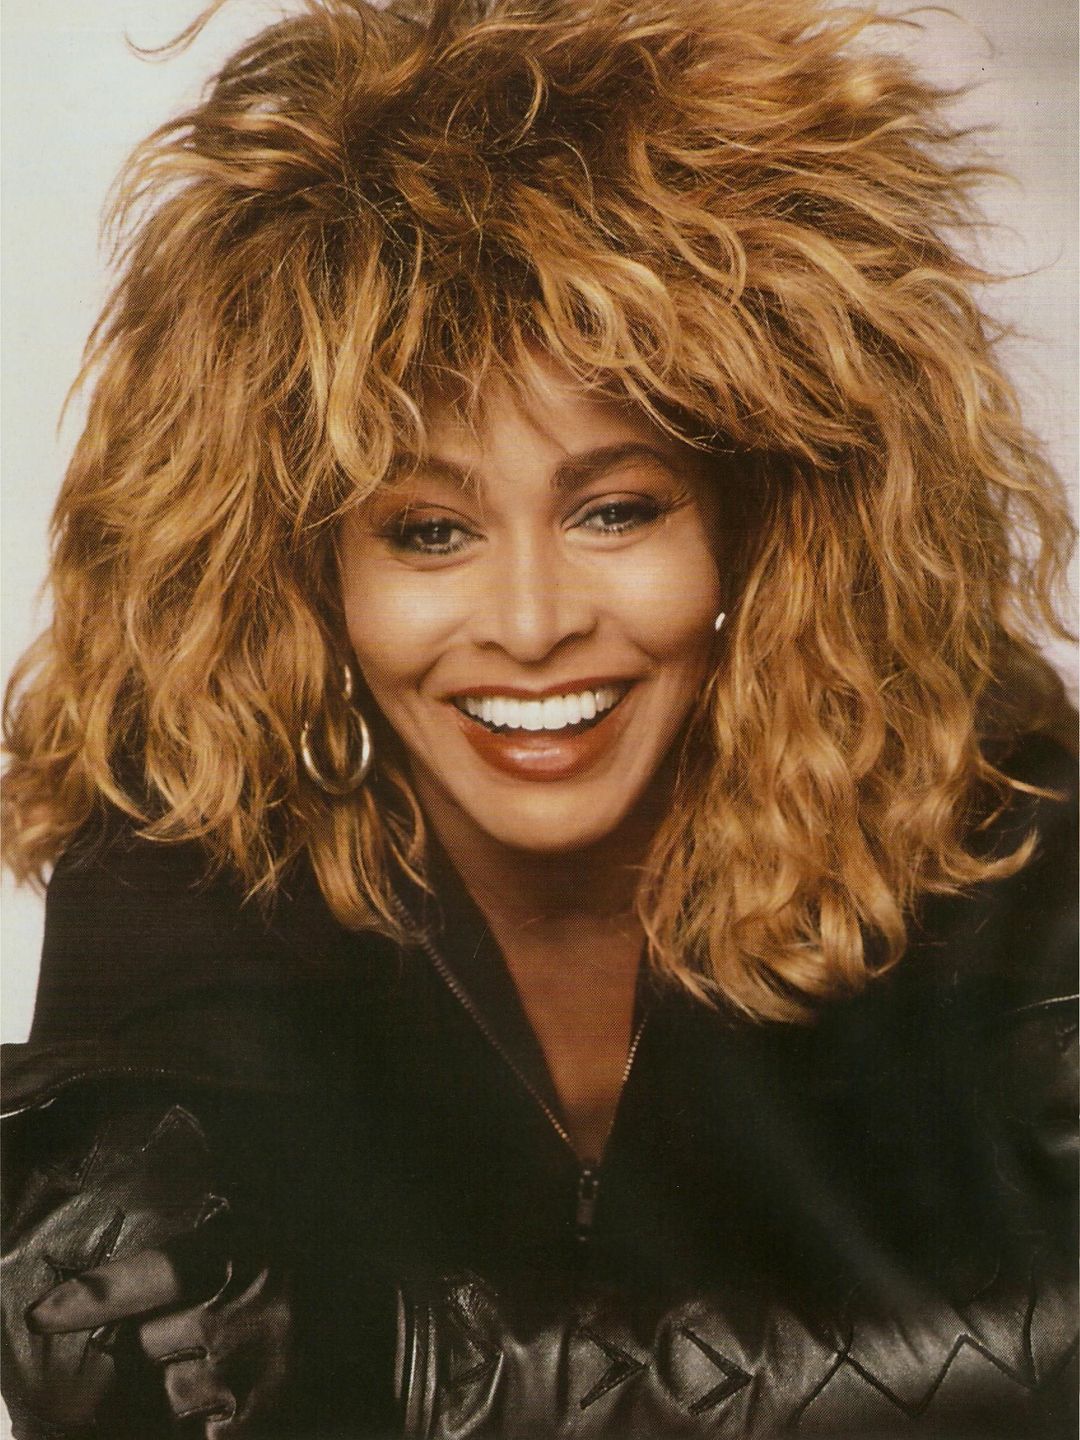 Tina Turner how did she became famous